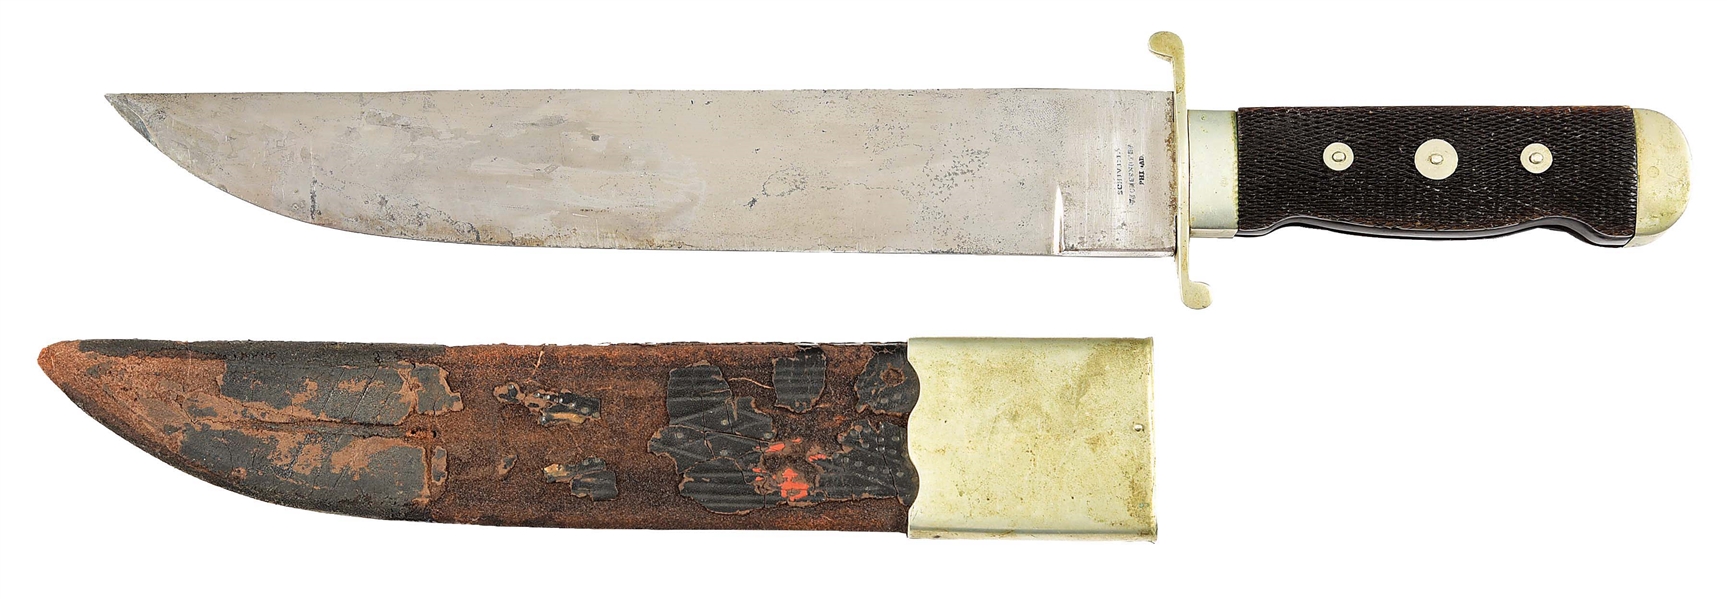 RARE AND NEWLY DISCOVERED “IMPROVED PATTERN” BOWIE KNIFE BY SCHIVELY, PHILADELPHIA.